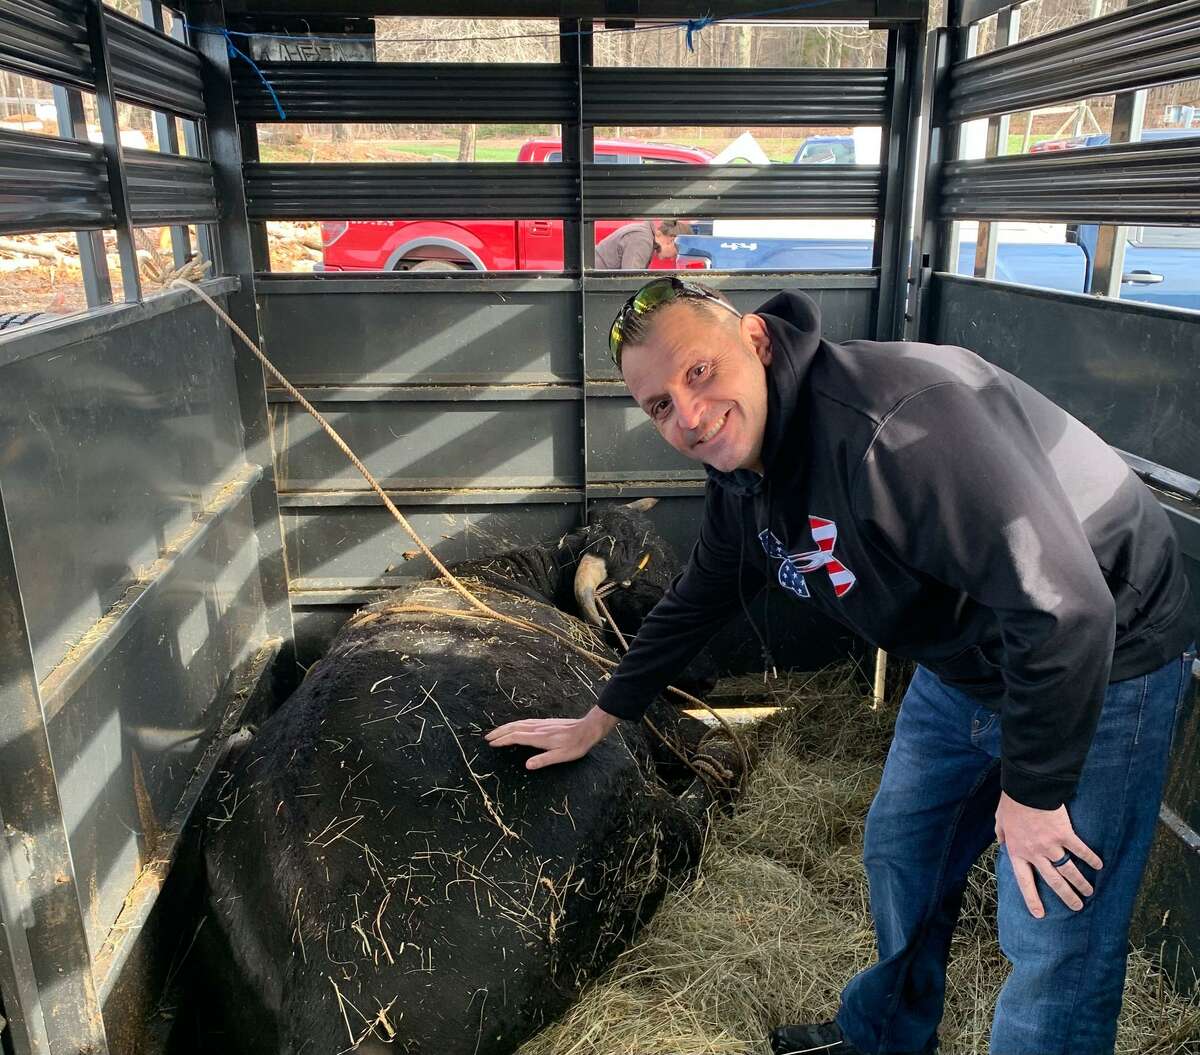 Plymouth Police Capt. Ed Benecchi poses with Buddy the beefalo after his capture.